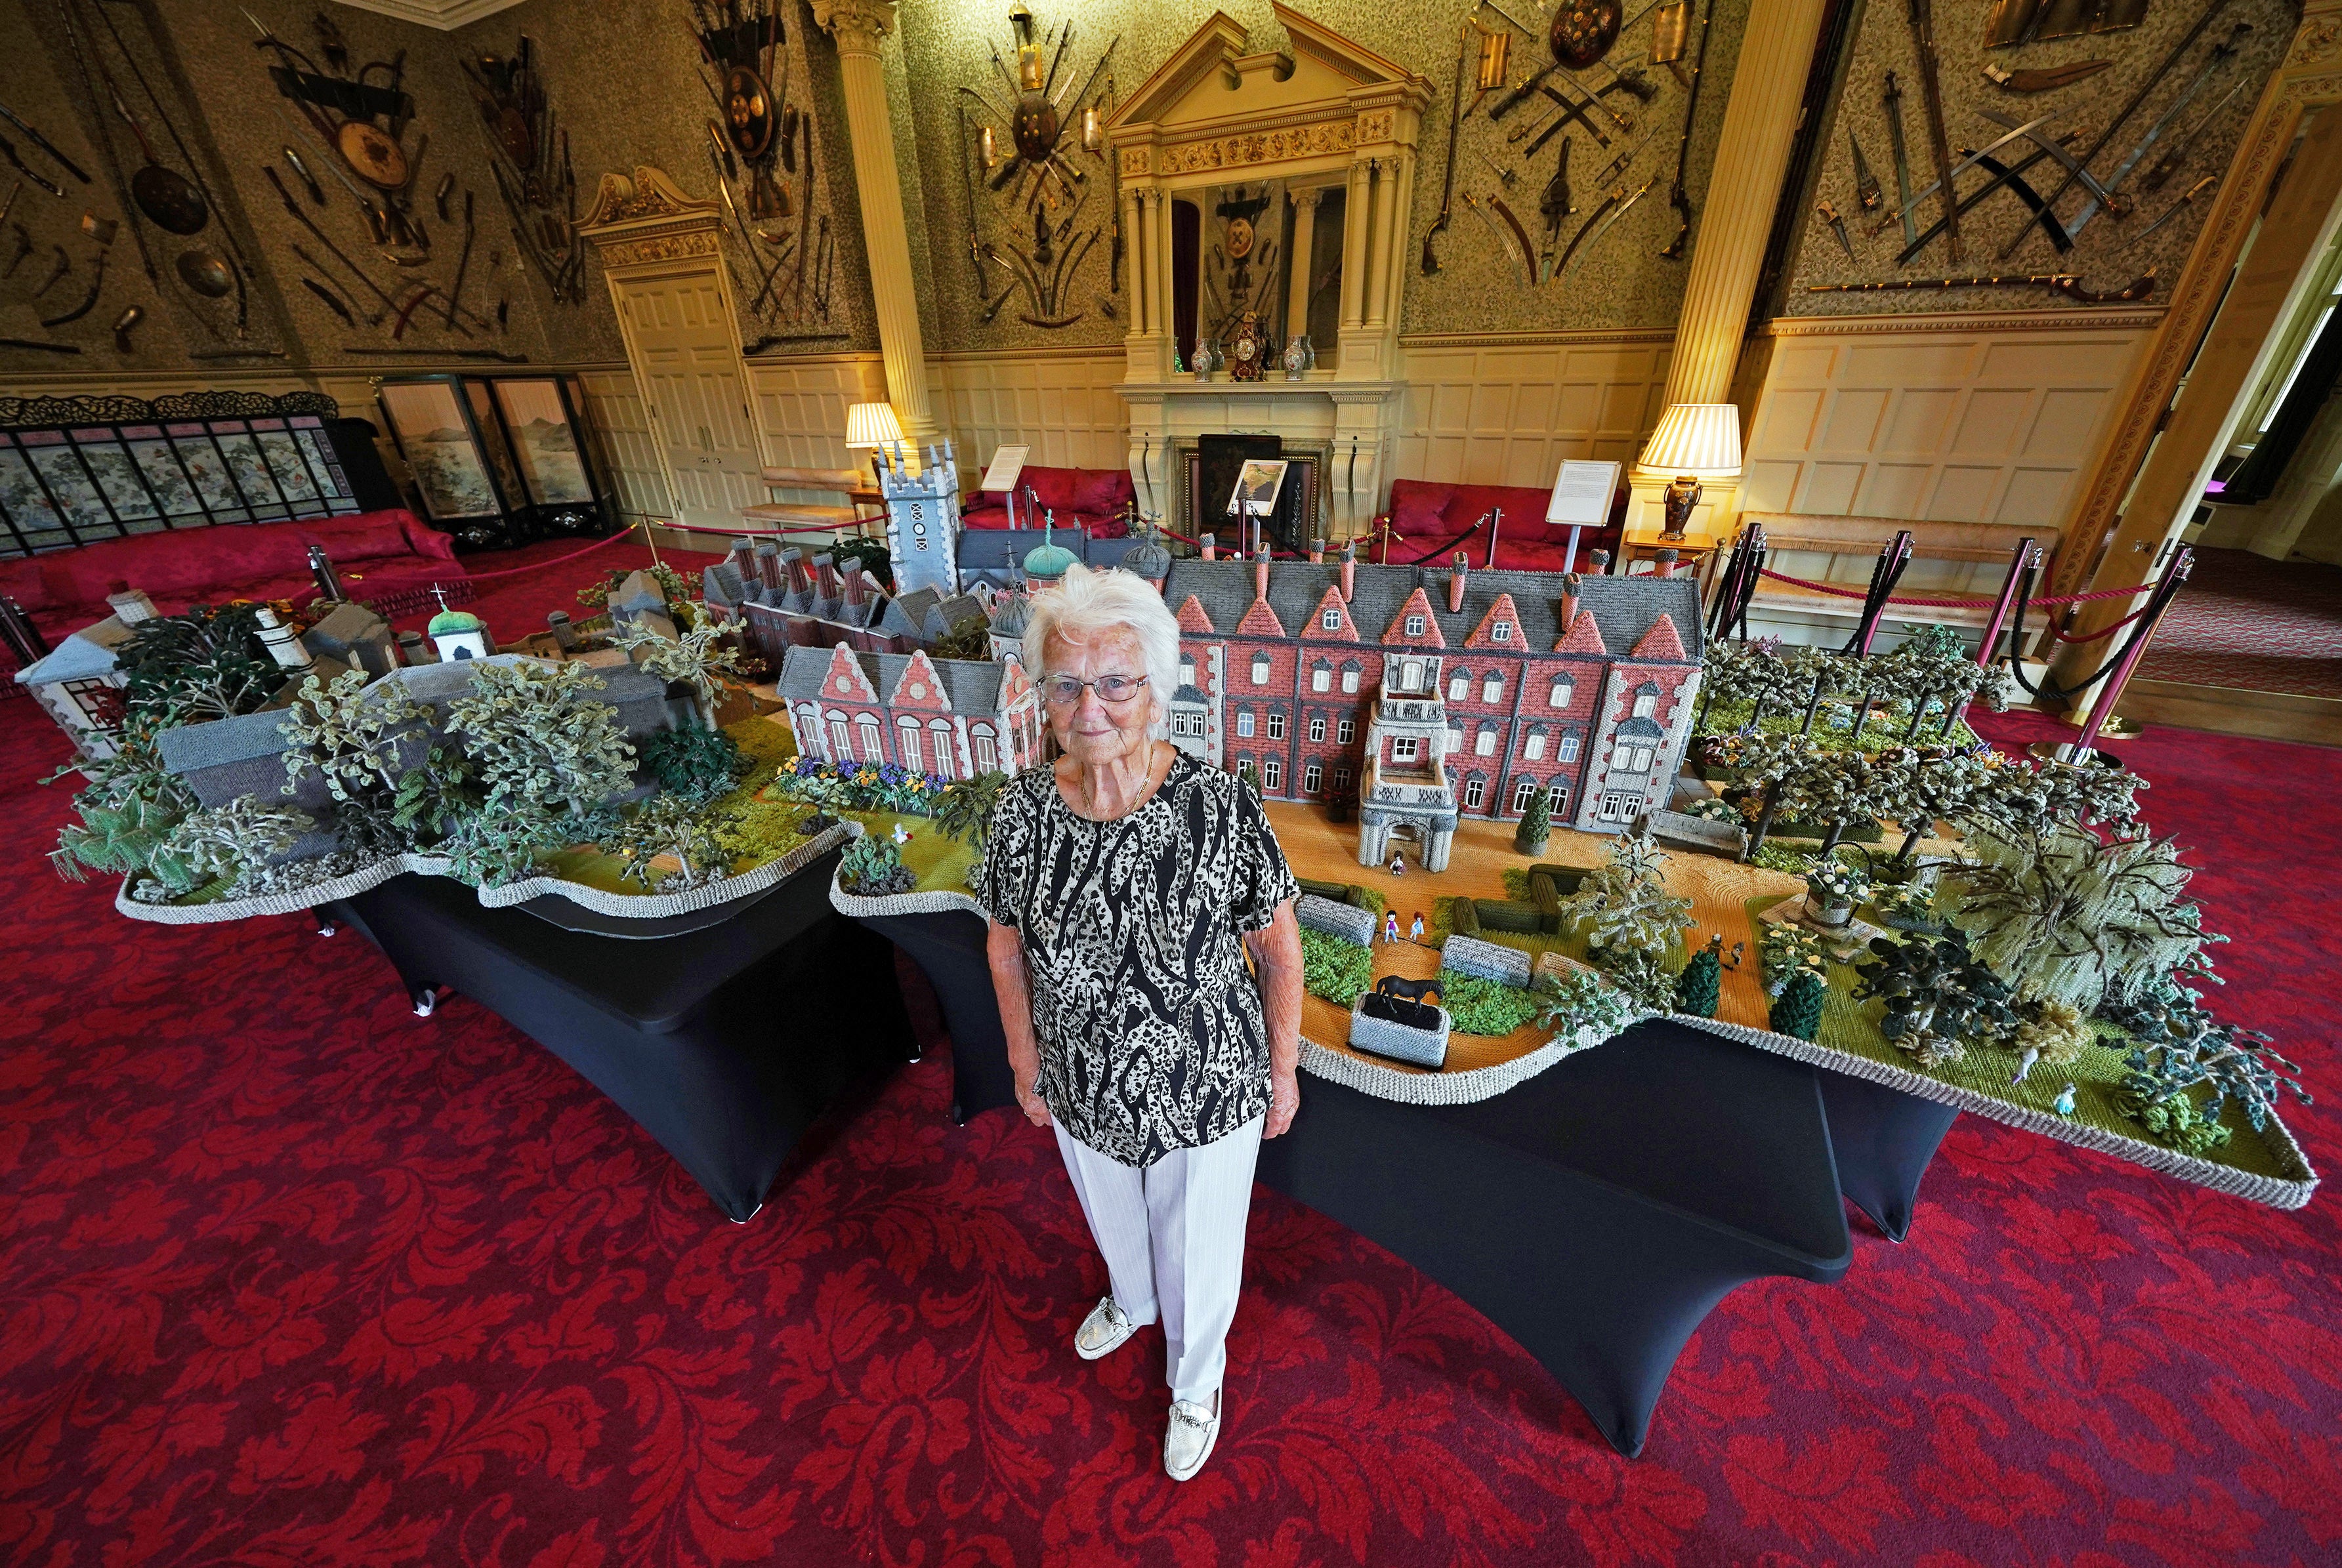 Ninety-two-year-old Margaret Seaman from Great Yarmouth, Norfolk, stands next to her creation ‘Knitted Sandringham’, on display in the Ballroom of Sandringham House last year (Yui Mok/PA)